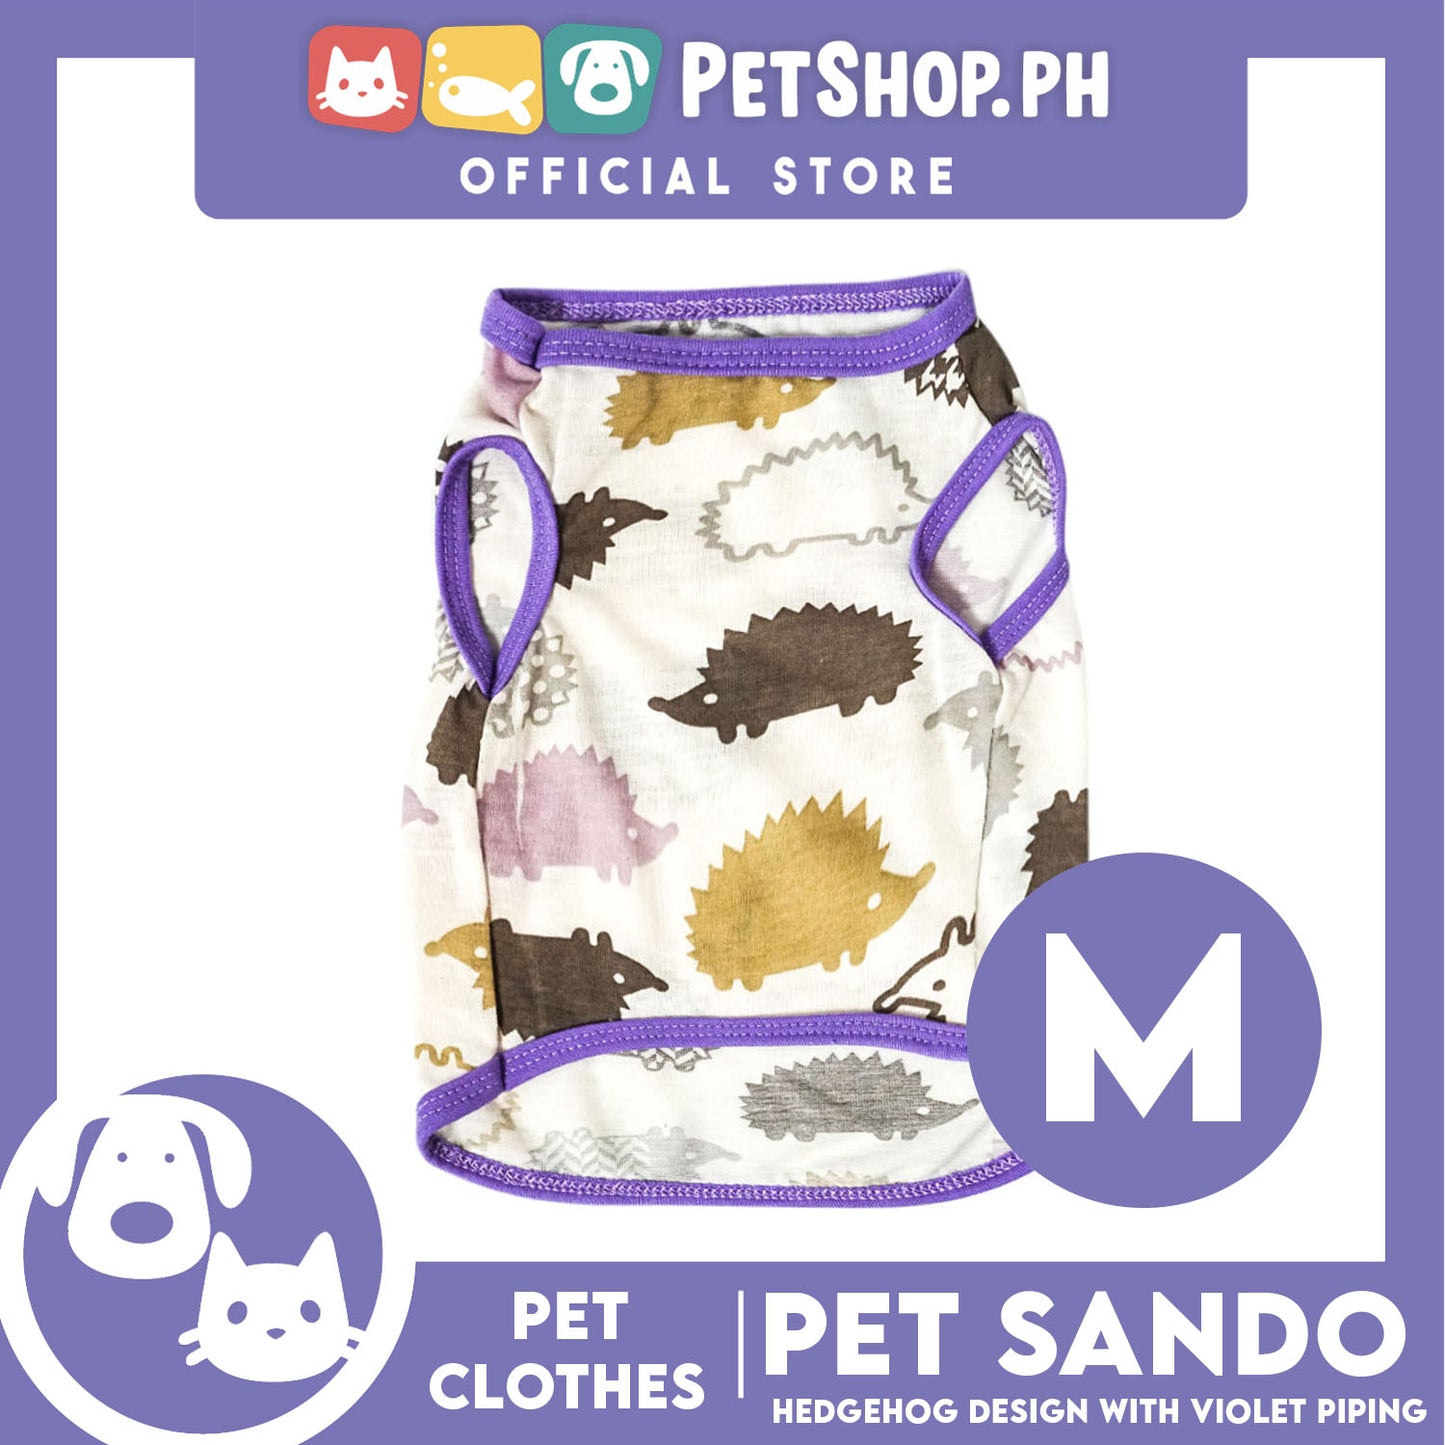 Pet Sando Hedgehog Design with violet piping (Medium) Pet Clothes Perfect Fit for Dogs